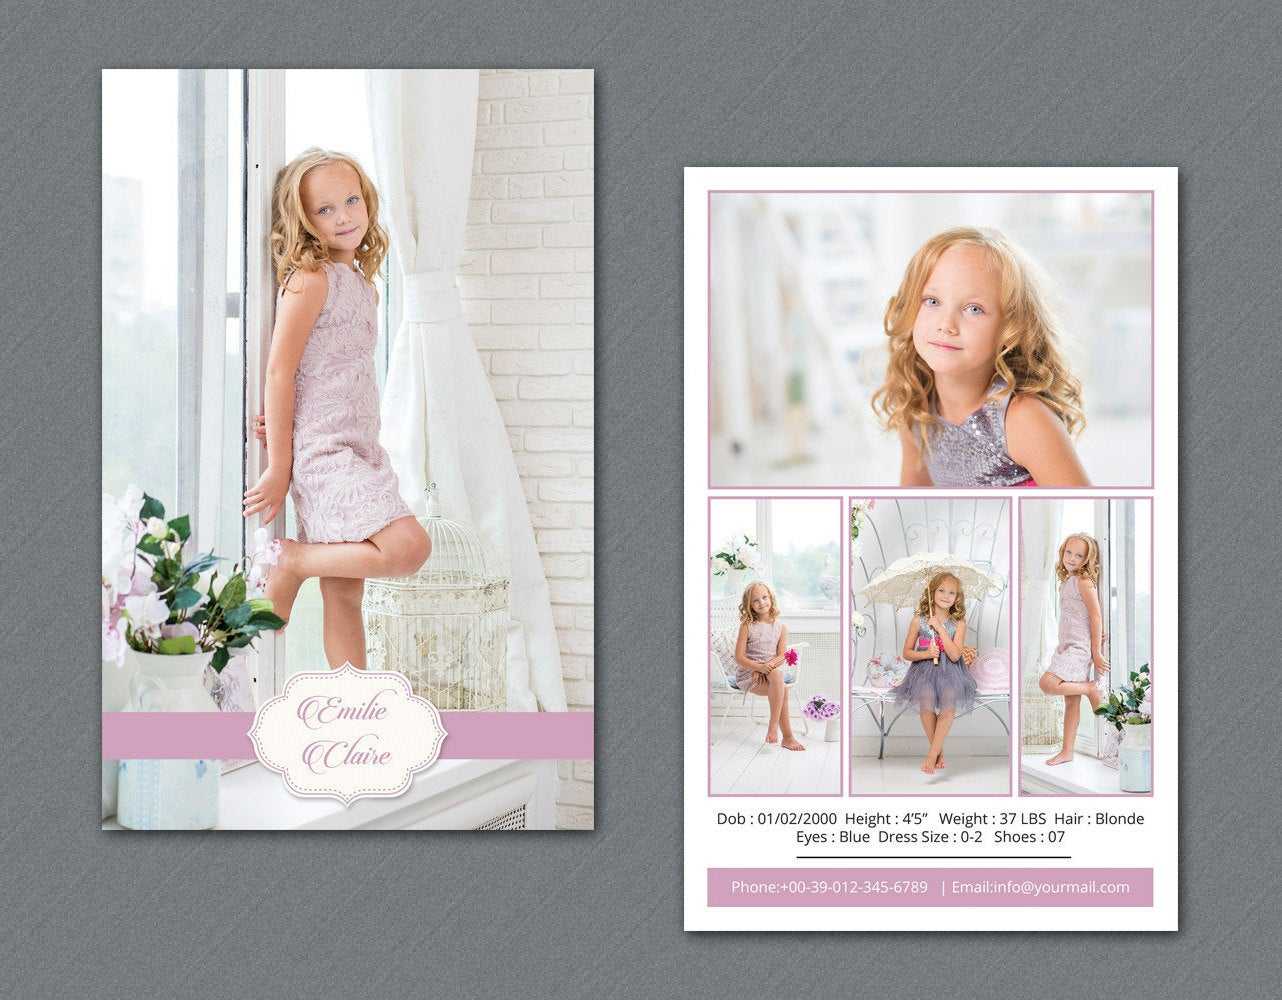 Comp Card Templates ] – On Sale Model Comp Card Photoshop Pertaining To Comp Card Template Download